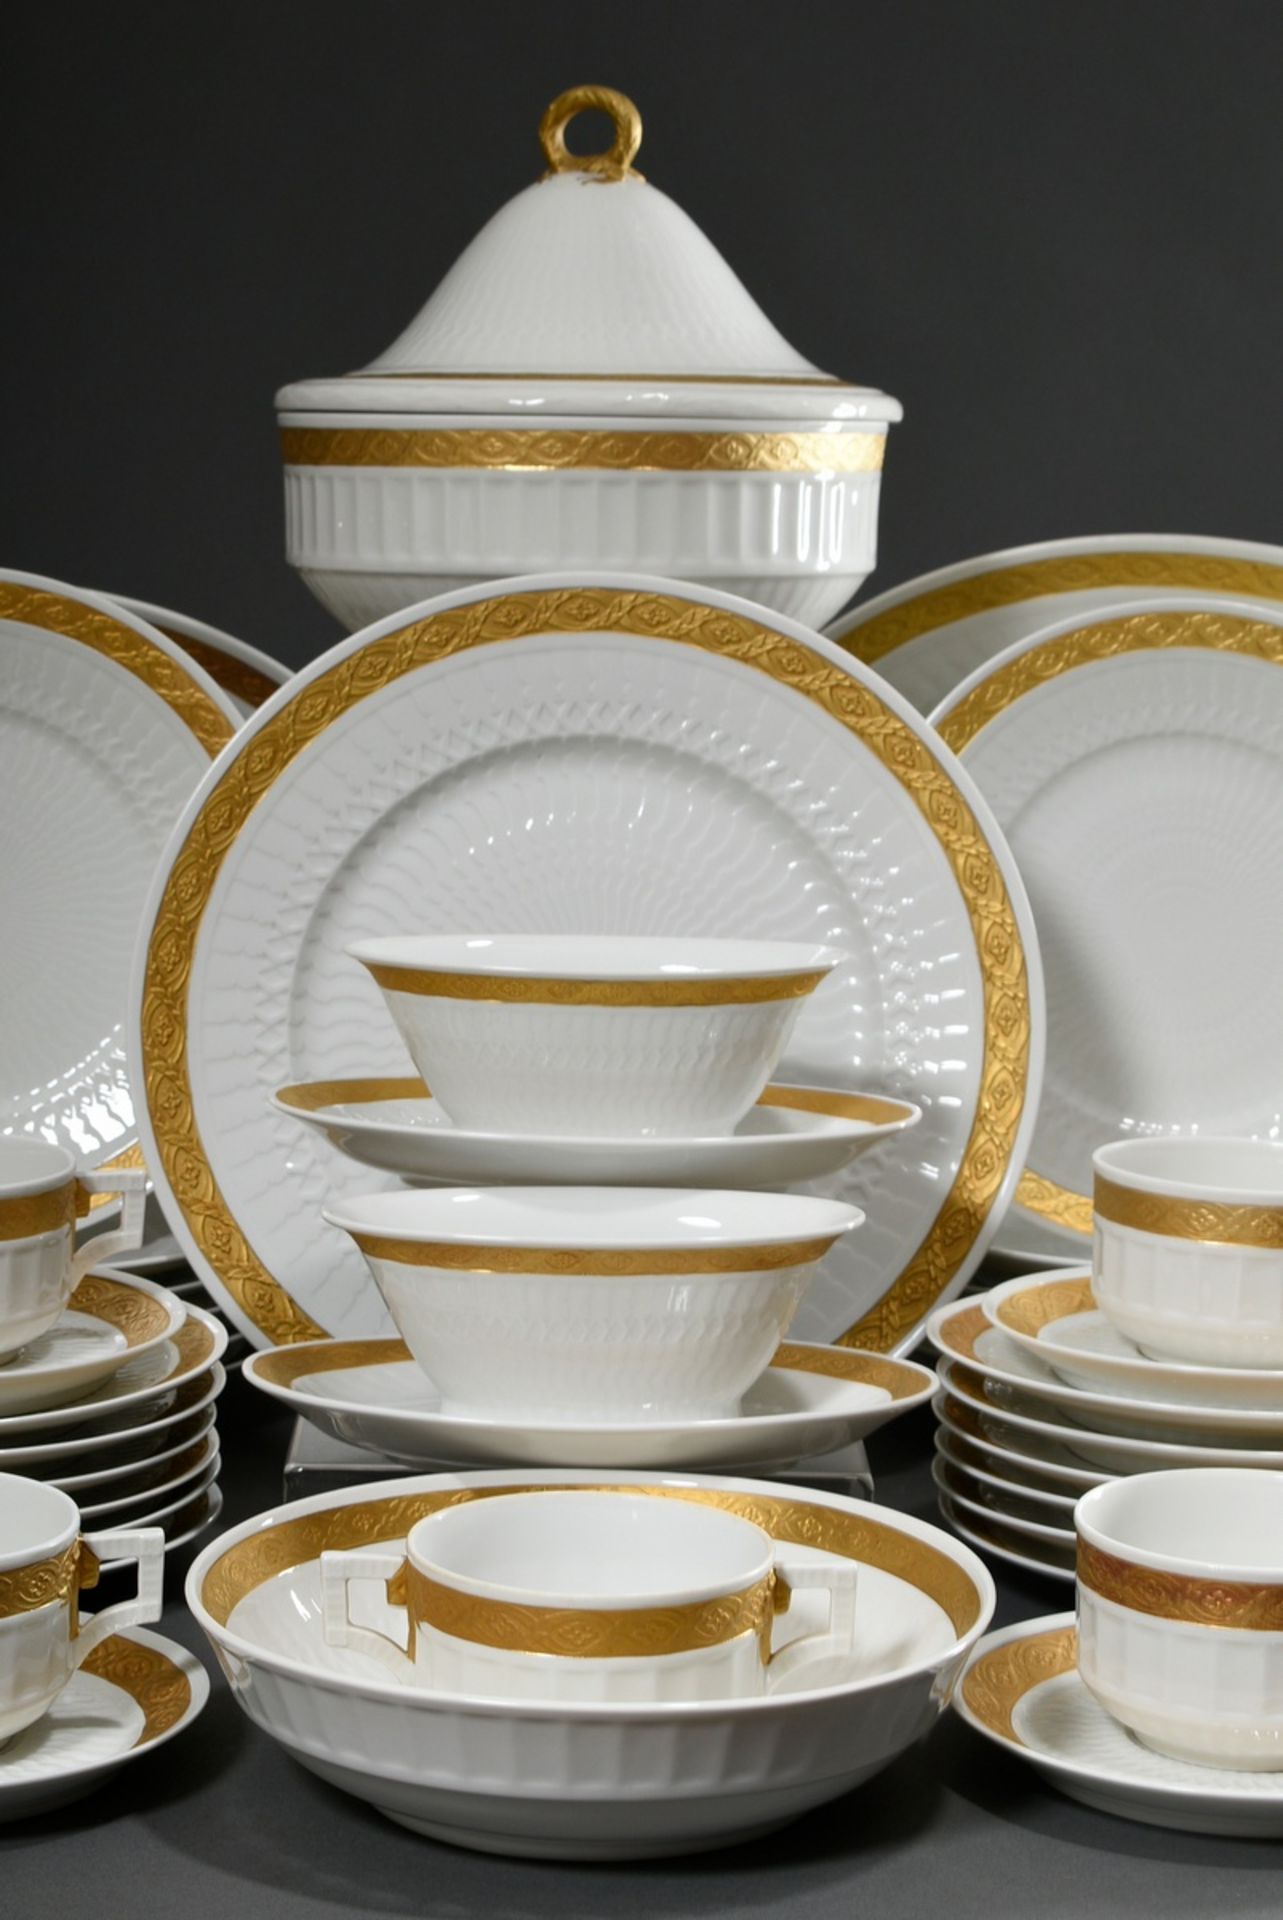 67 pieces Royal Copenhagen "Fan Gold", consisting of: 12 dinner plates (Ø 26cm, 11519), 11 small di - Image 2 of 4